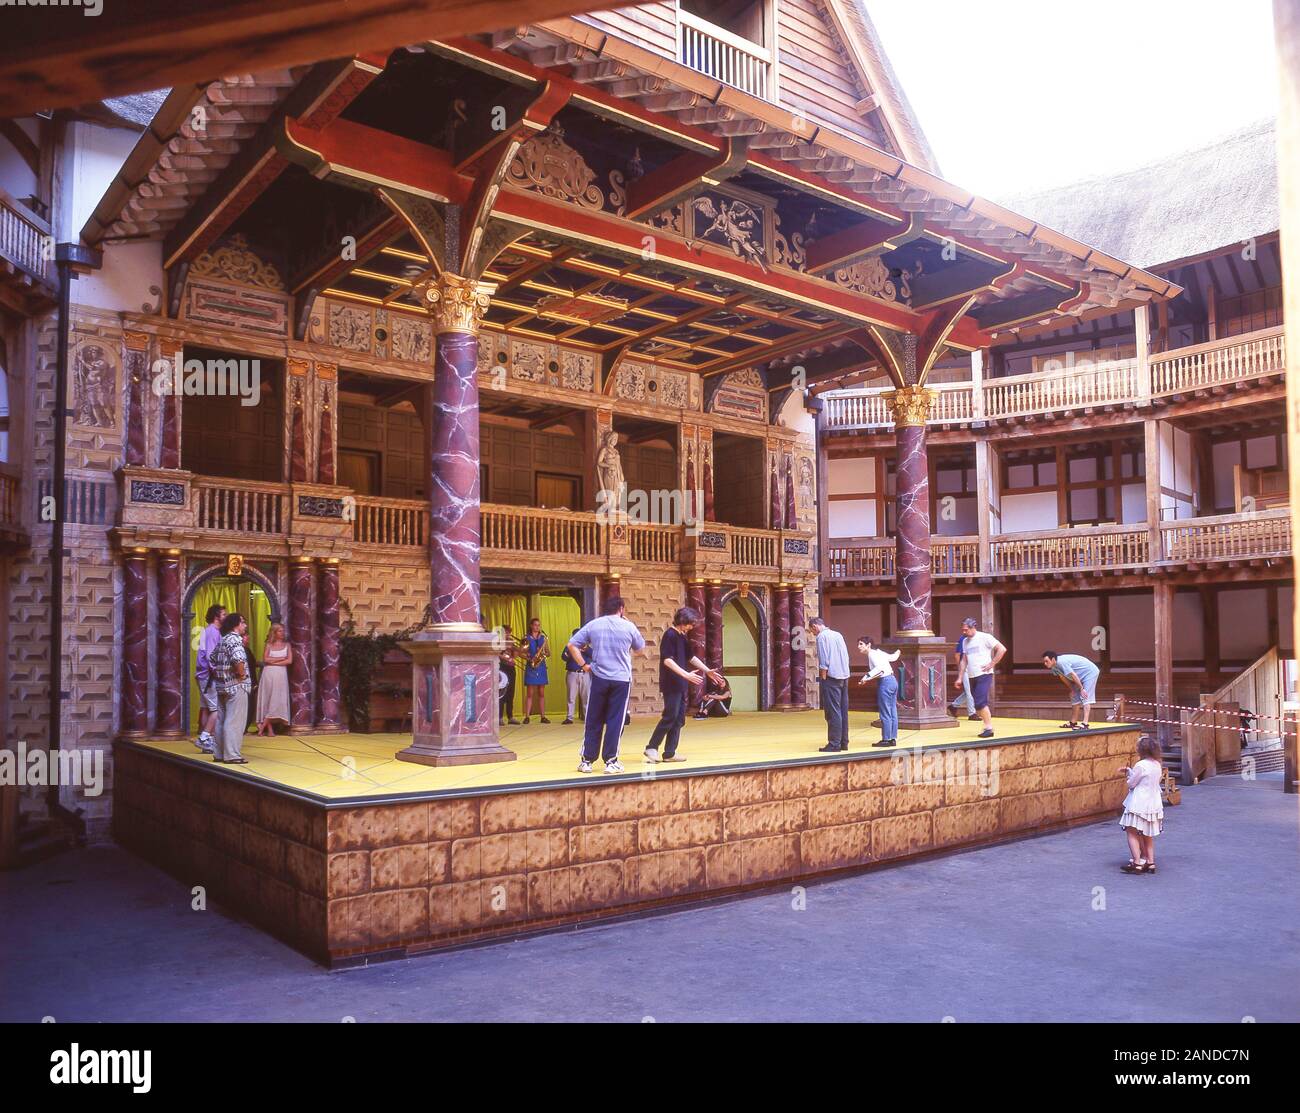 Stage at William Shakespeare's Globe Theatre, Park Street, London Borough of Southwark, Greater London, England, United Kingdom Stock Photo